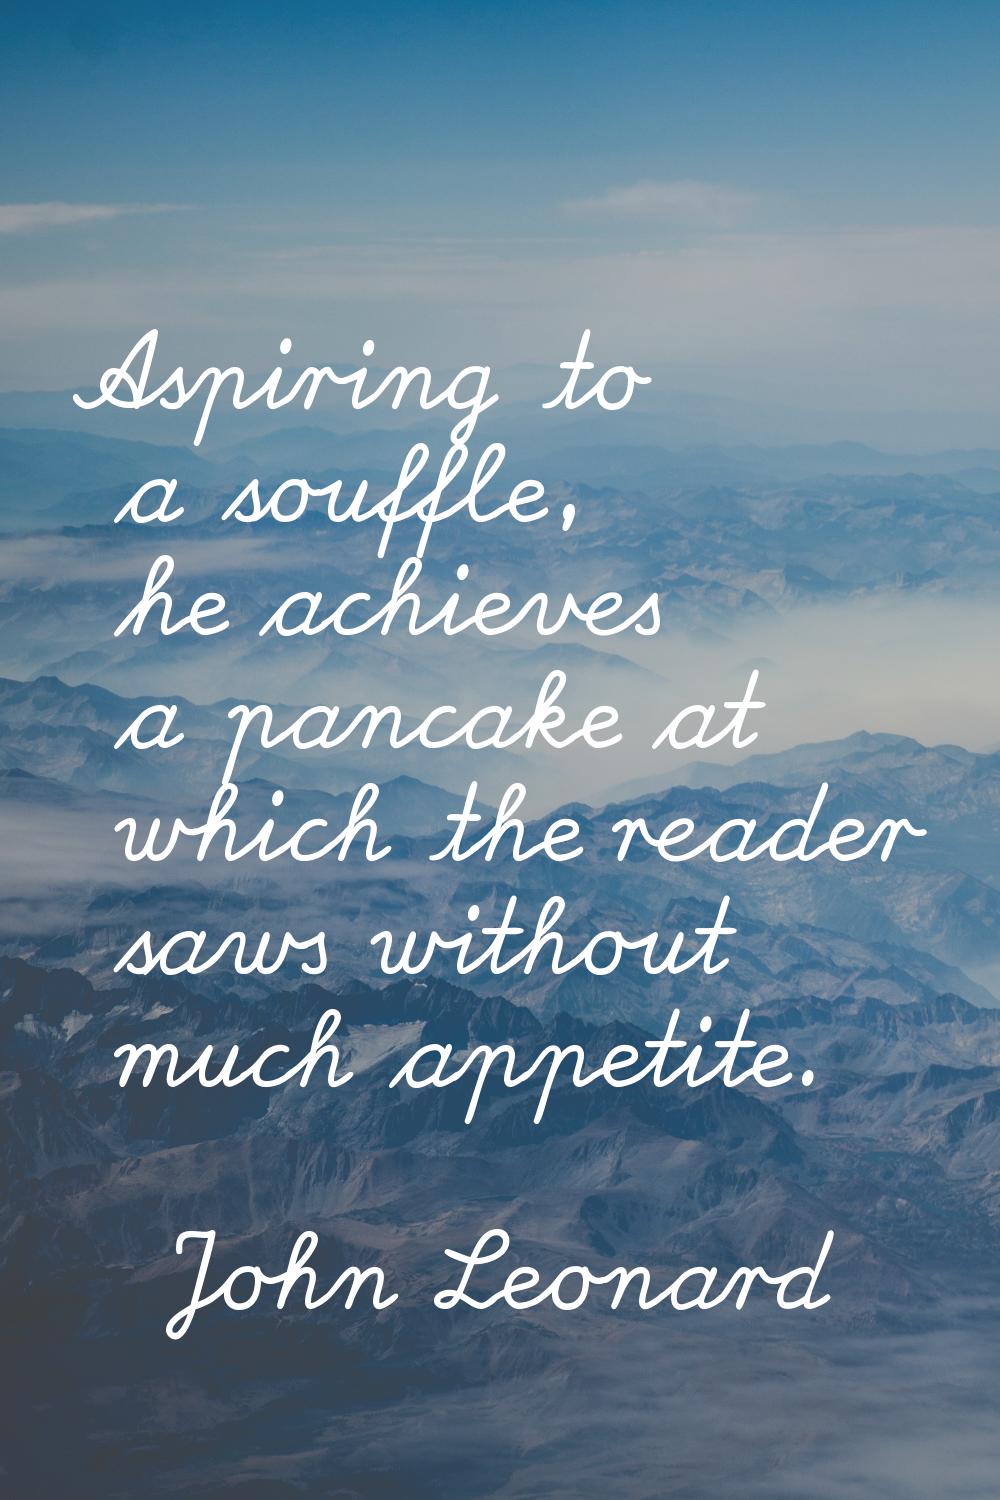 Aspiring to a souffle, he achieves a pancake at which the reader saws without much appetite.